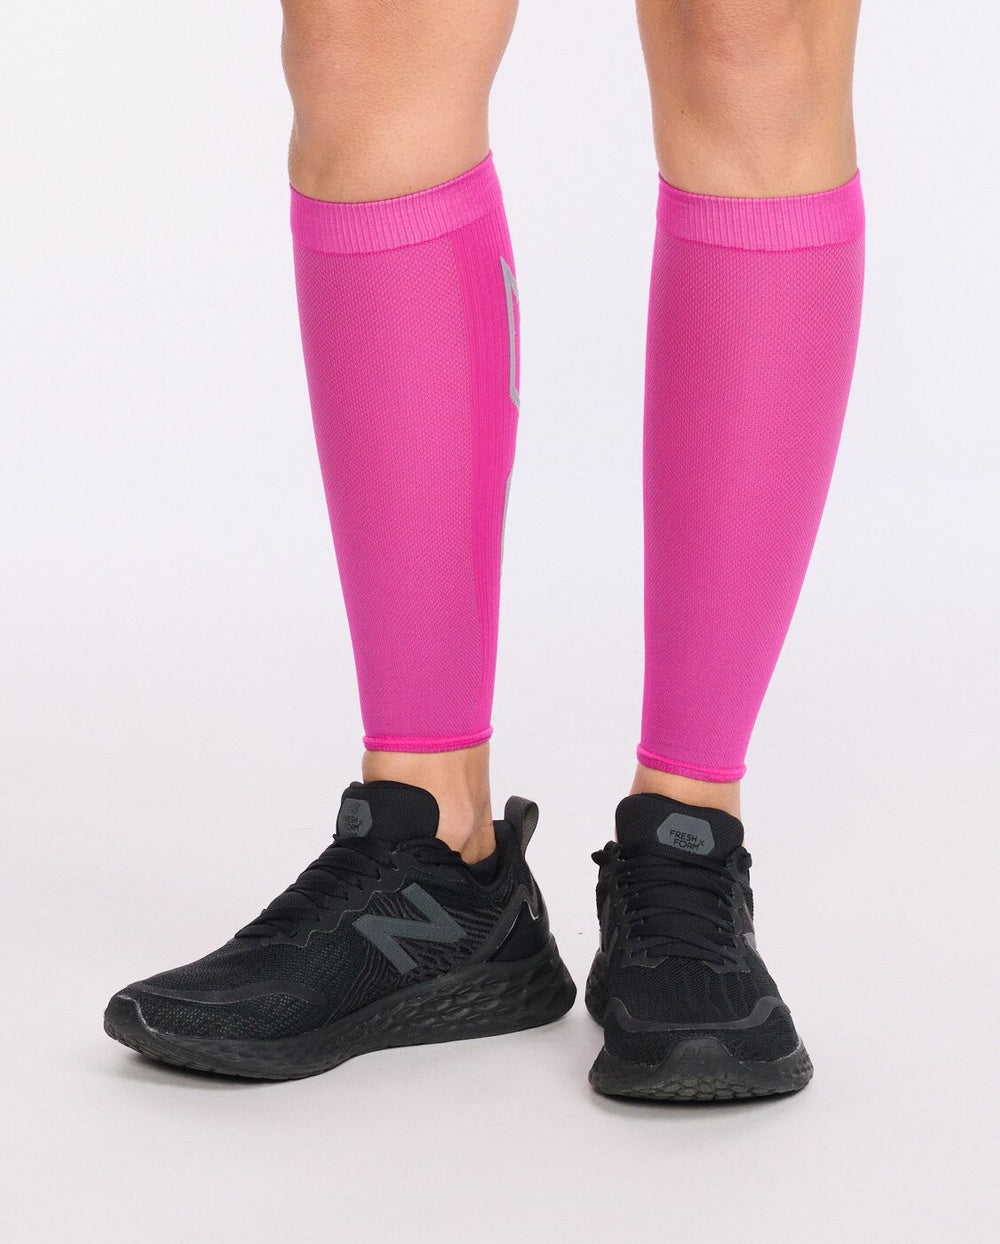 X COMPRESSION CALF SLEEVES